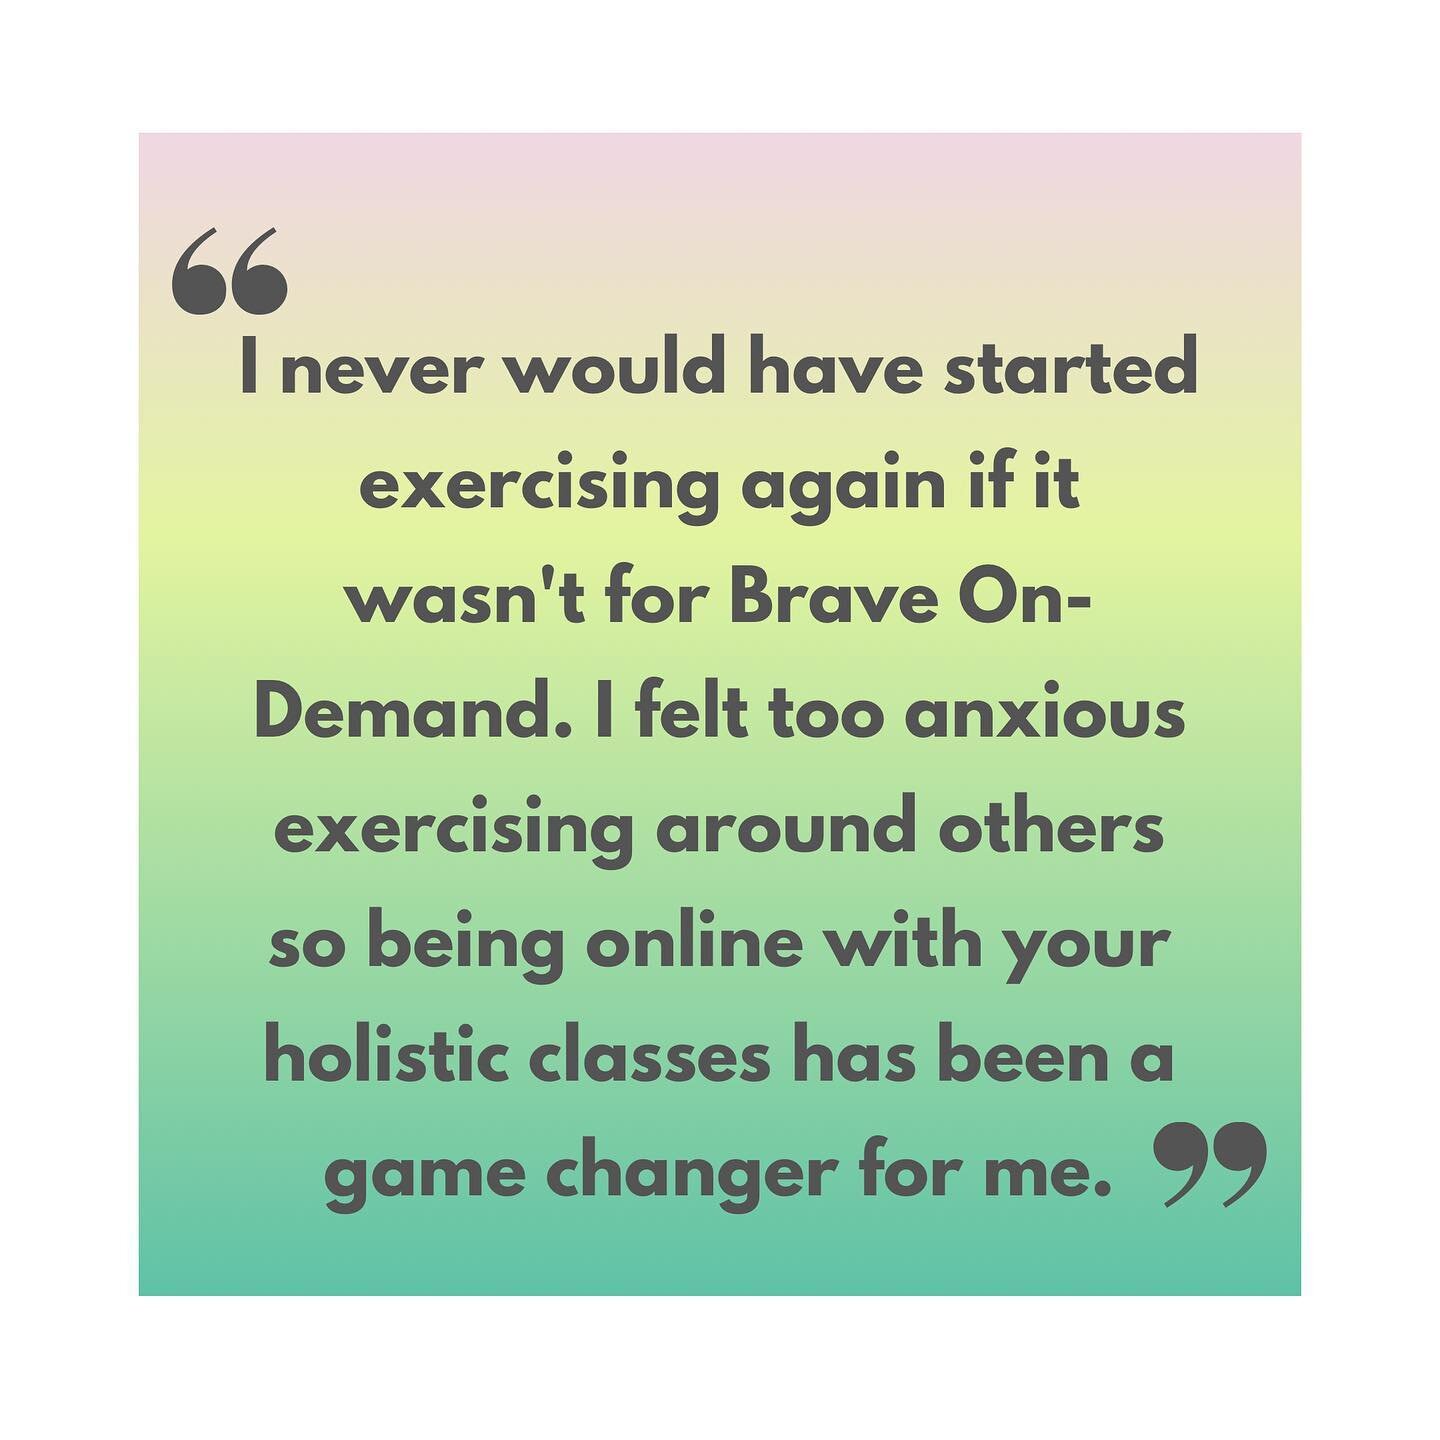 Summer Sale has started on our Brave On-Demand service! 🥳☀️😎

First 2 months for only &pound;10 (that&rsquo;s only &pound;2.50 for 70+ classes!) with discount code: SUMMER22

Scroll to check out what our clients have been saying about it! 💕 

☀️Su